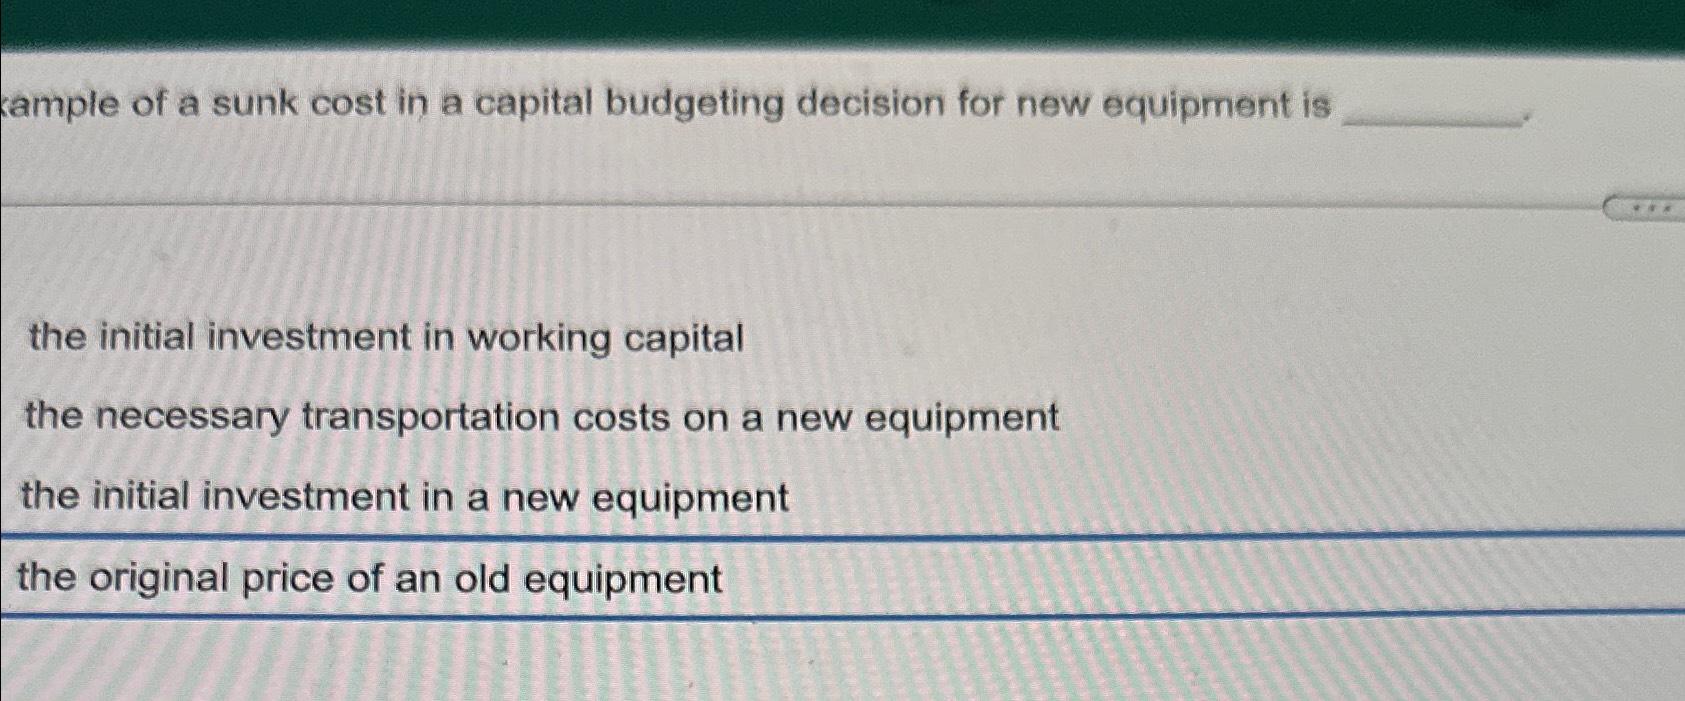 kample of a sunk cost in a capital budgeting decision for new equipment is the initial investment in working